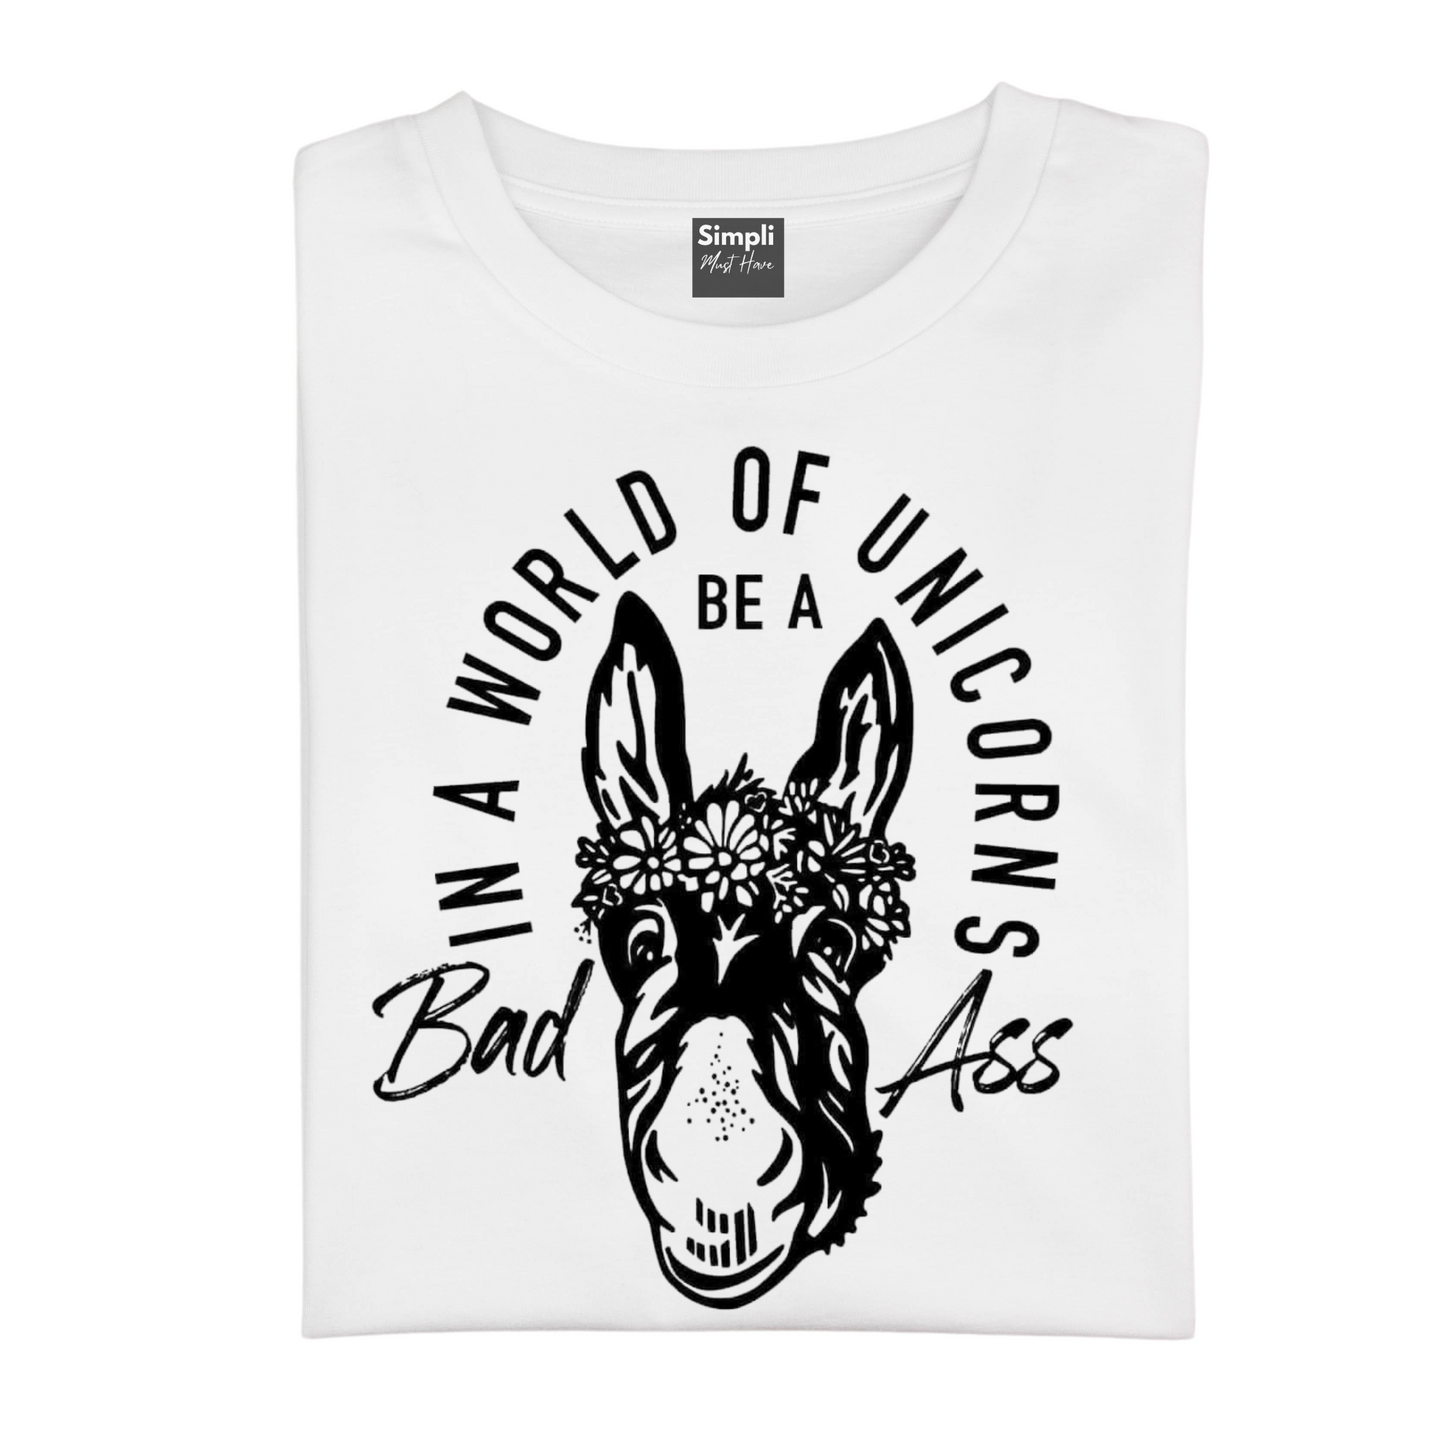 In a World of Unicorns be a Bad Ass Tshirt